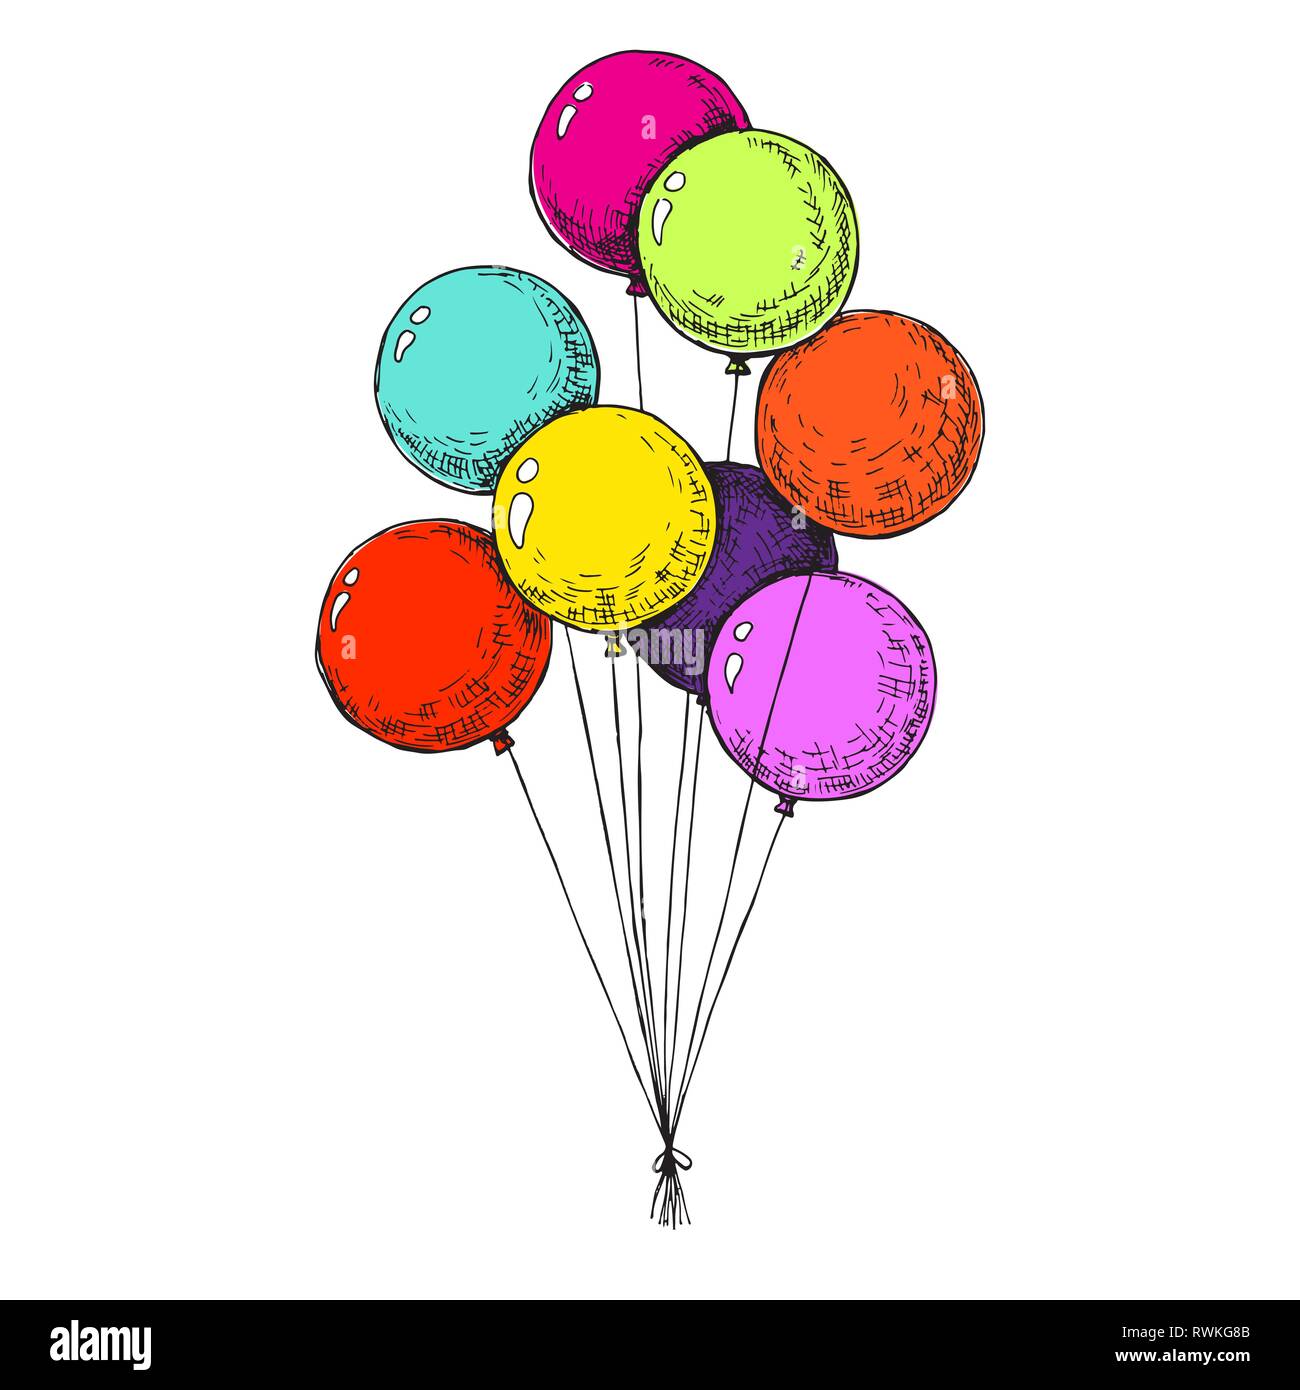 https://c8.alamy.com/comp/RWKG8B/group-of-balloons-on-a-string-hand-drawn-isolated-on-a-white-background-vector-illustration-vector-RWKG8B.jpg